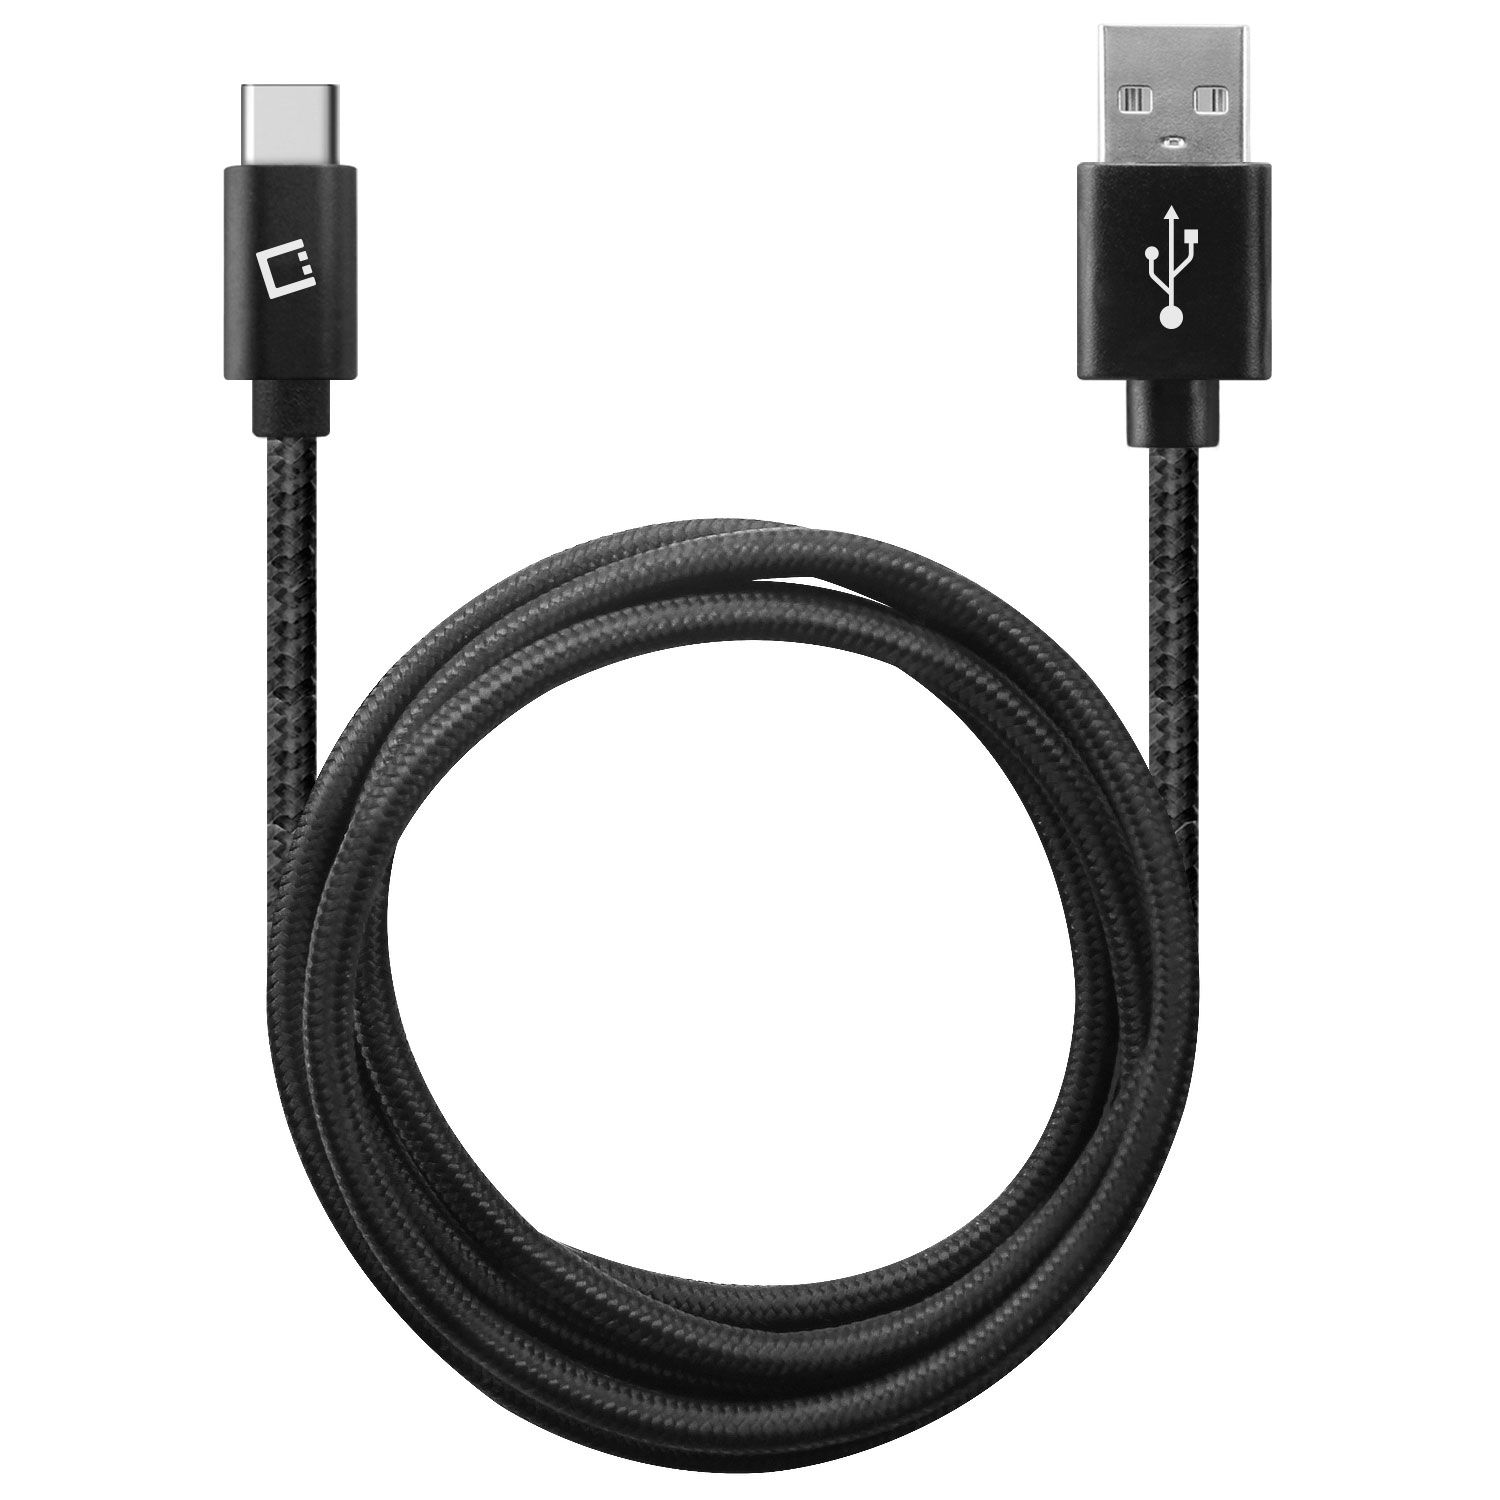 Cellet USB Cable Compatible with LG K51, Heavy Duty Braided USB Type C (USB-C to USB-A) Fast Charging Sync Cable (4 feet/1.2 meters) and Atom Wipe - image 1 of 8